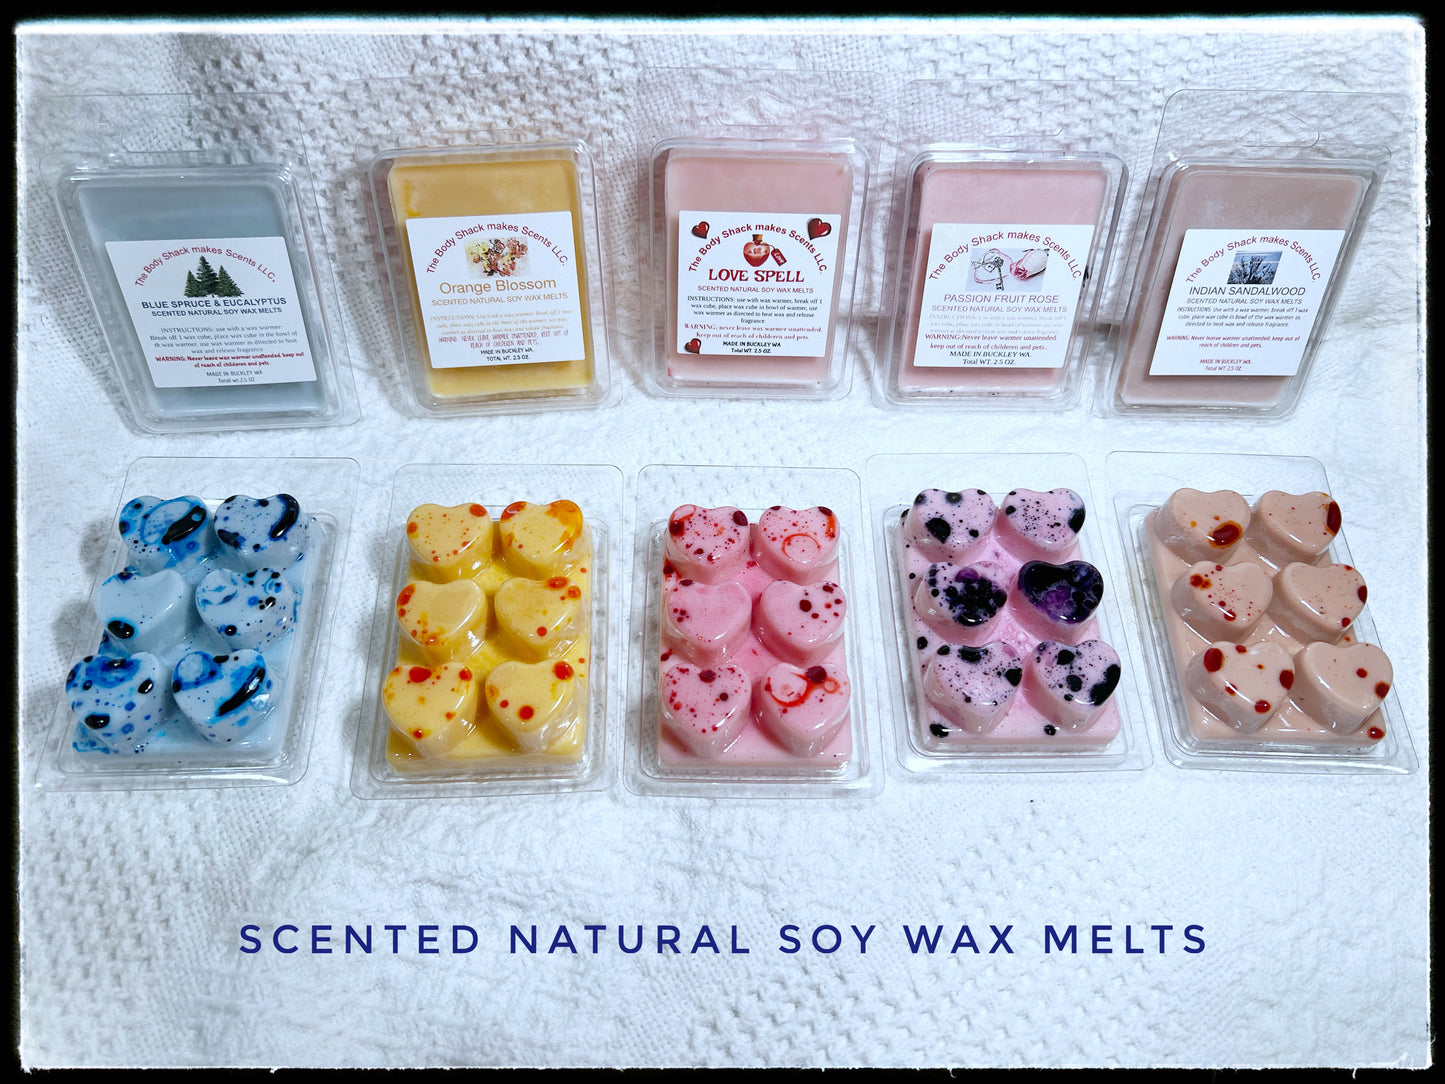 Scented Natural Soy Wax Melts